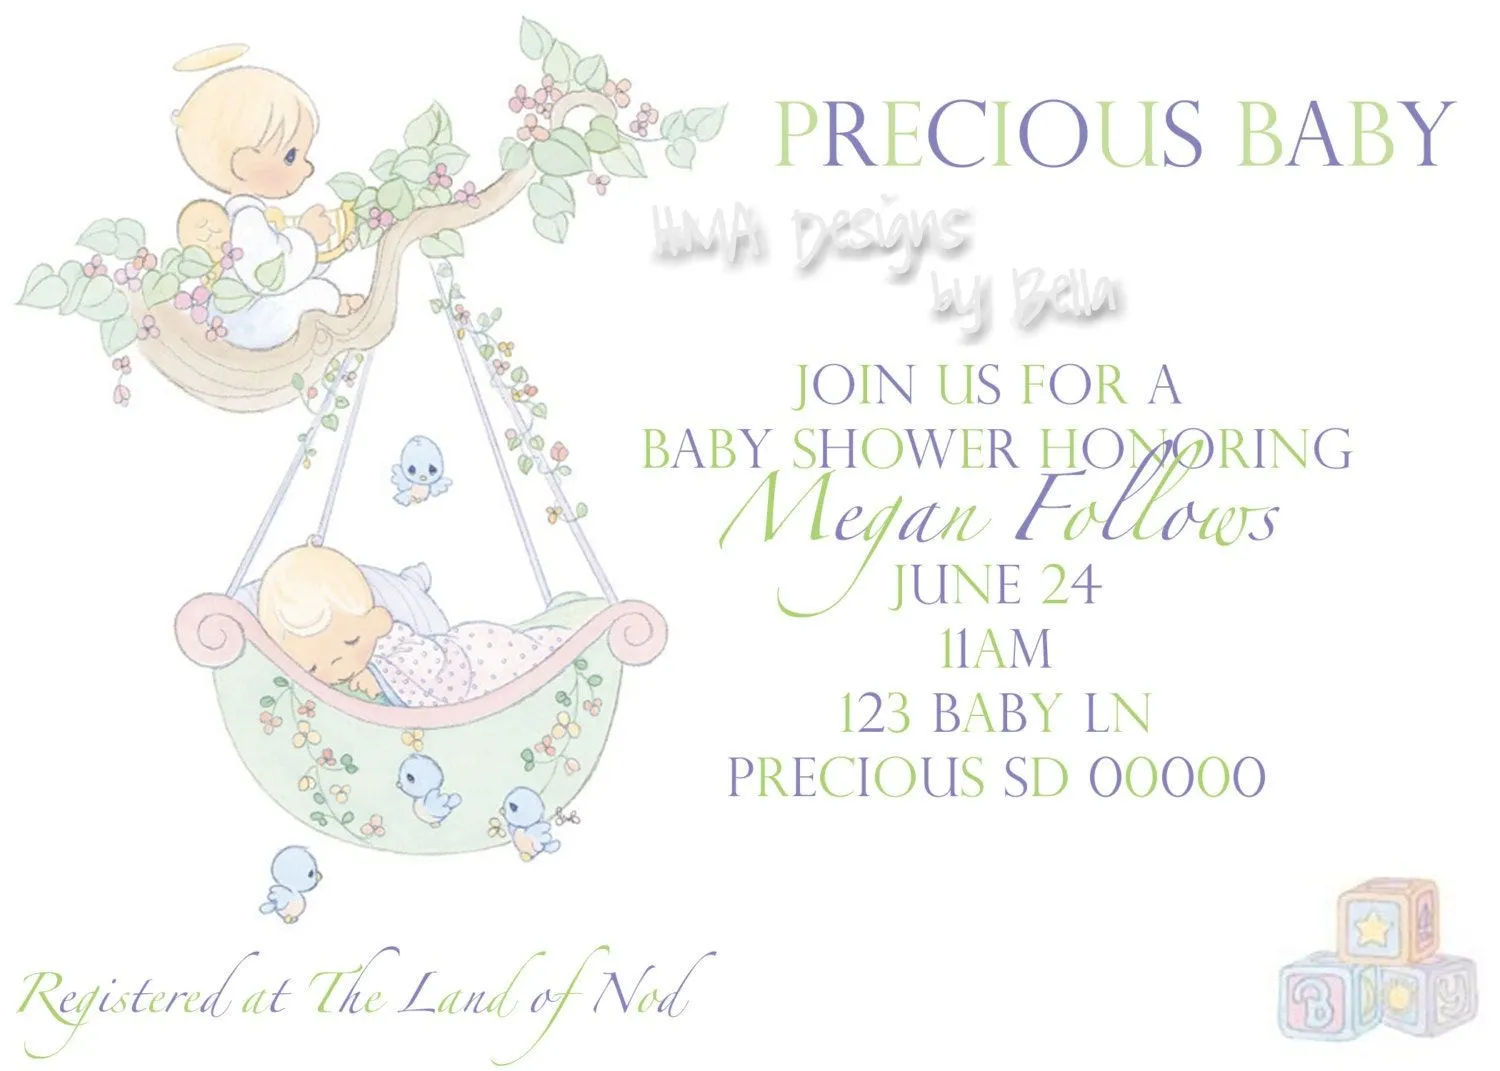 2 Precious Moments Baby Shower Invites by HMADesignsbyBella